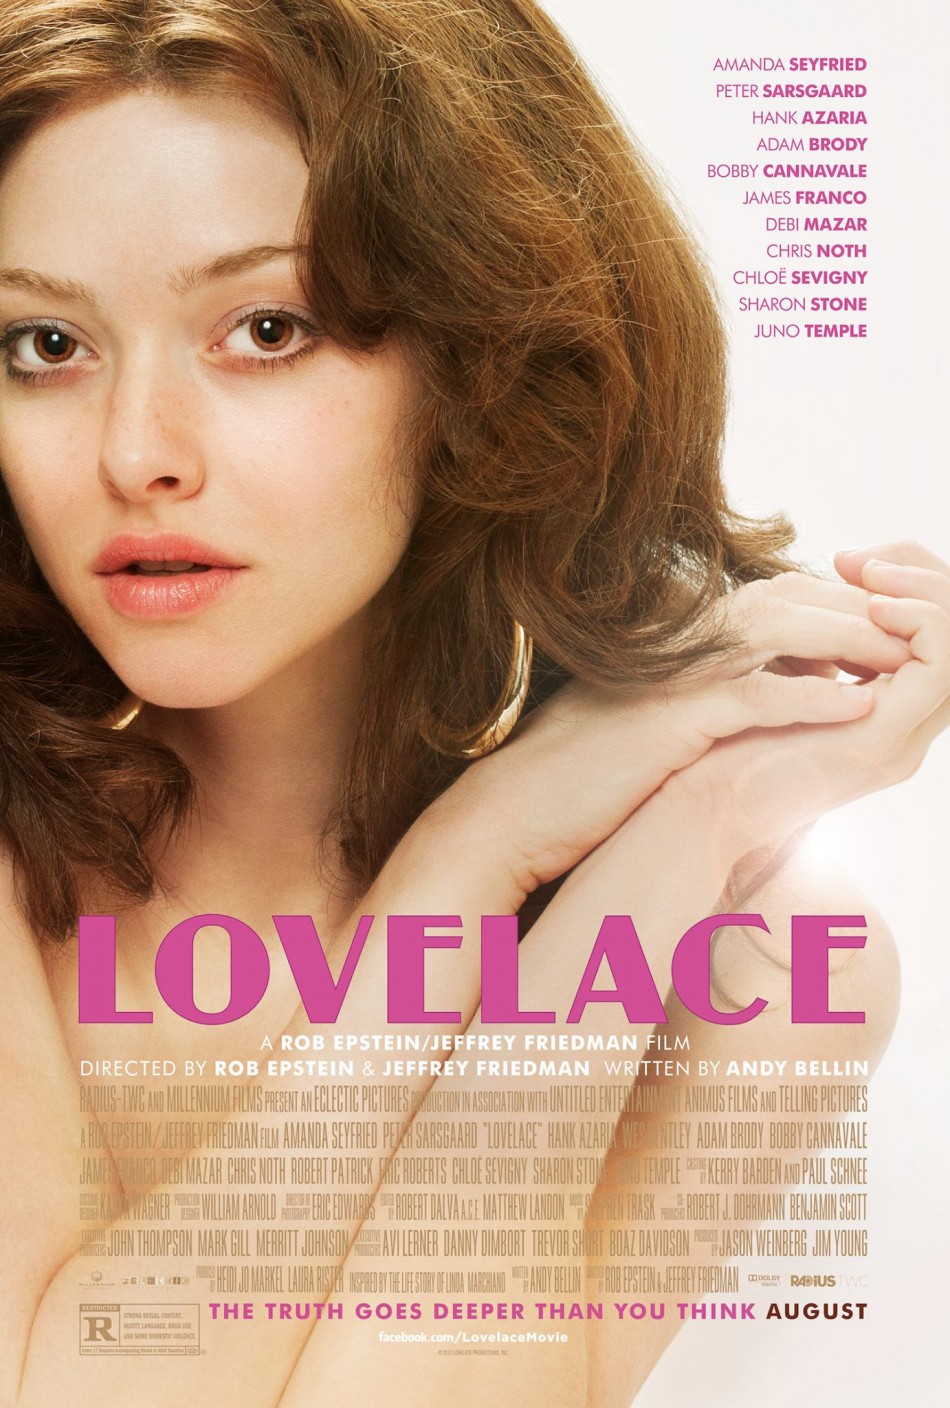 Amanda Seyfried Worried About Father Seeing Sexually Explicit Scenes In Lovelace [video]